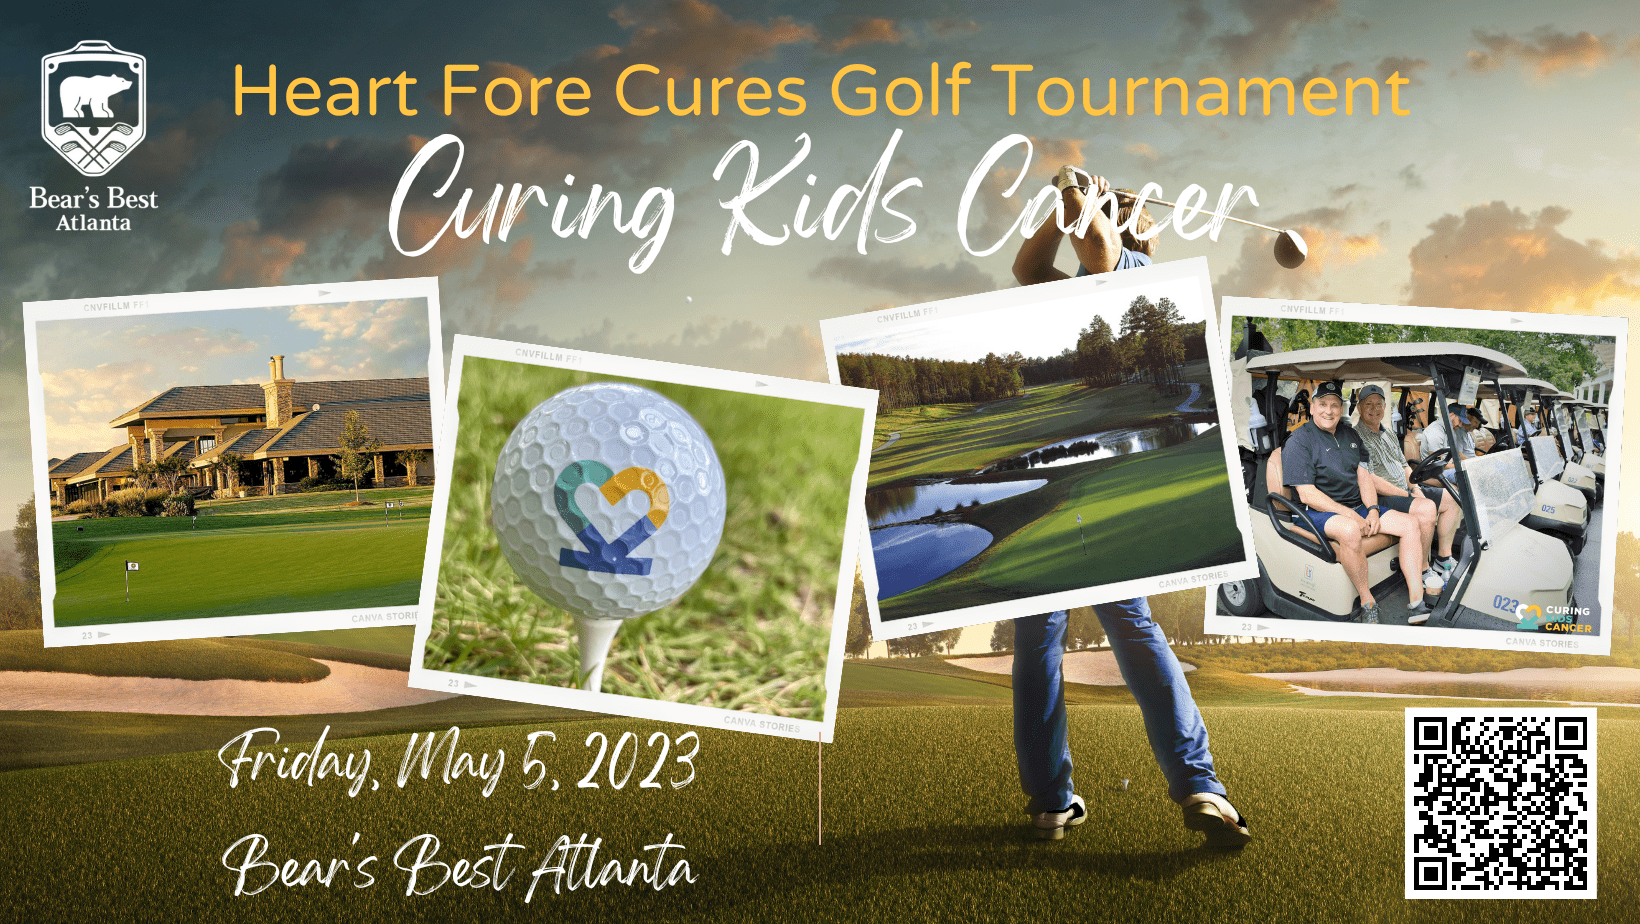 3rd Annual Heart Fore Cures Golf Tournament @ Bear's Best Atlanta |  |  | 